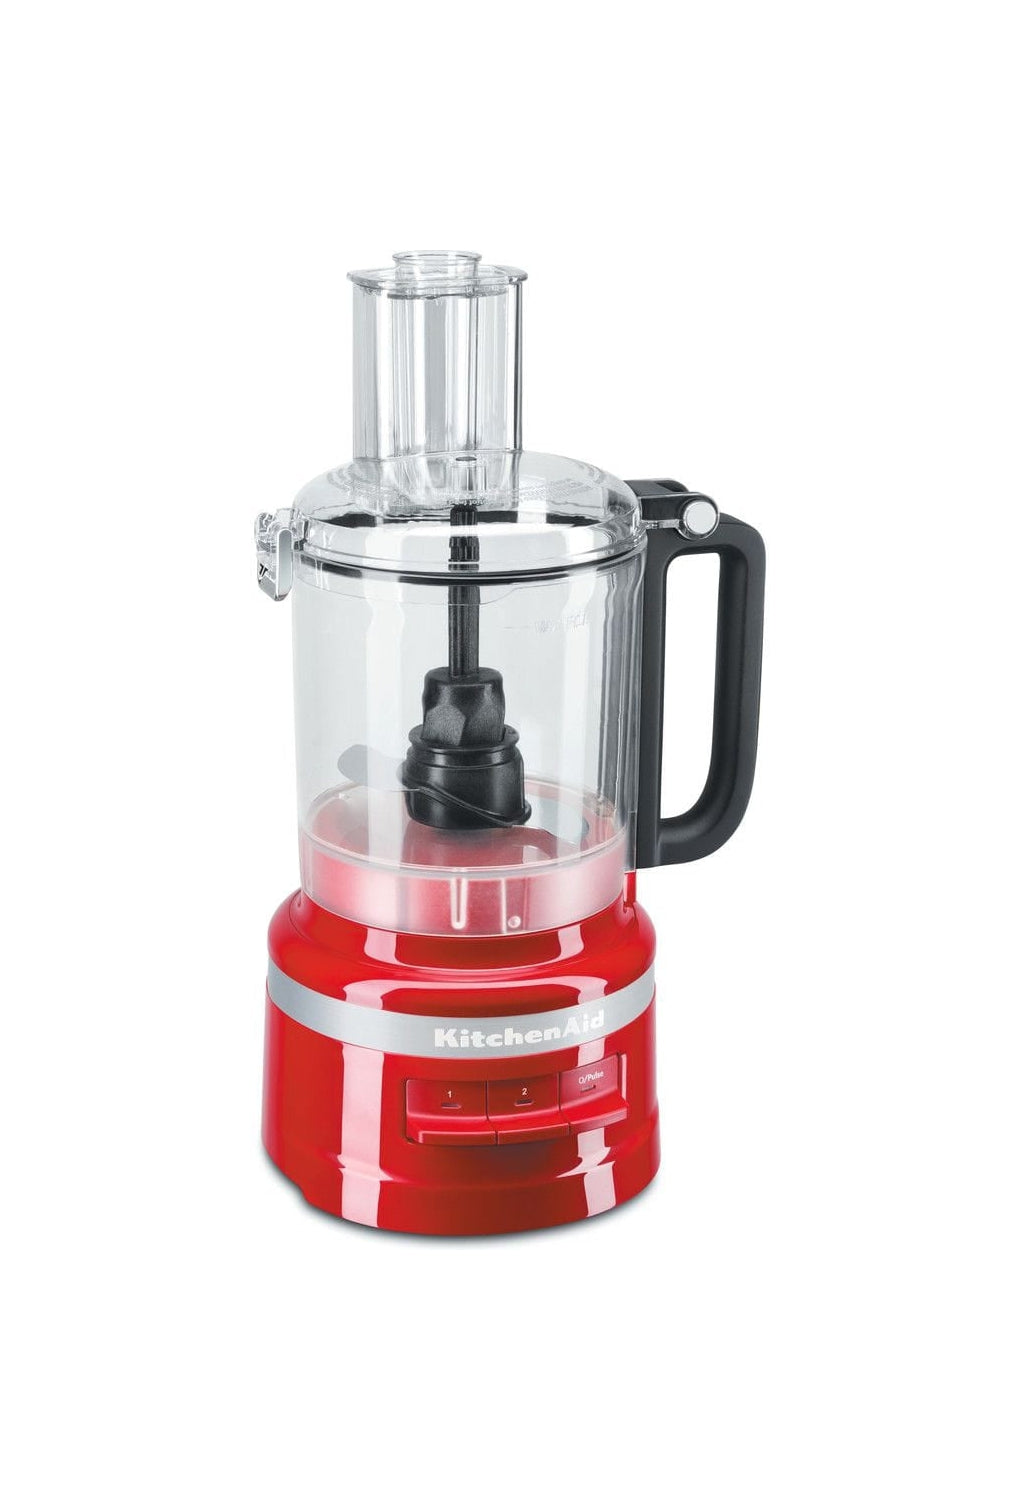 KitchenAid 5 KFP0719 Rytrage alimentaire 2.1 L, Empire Red